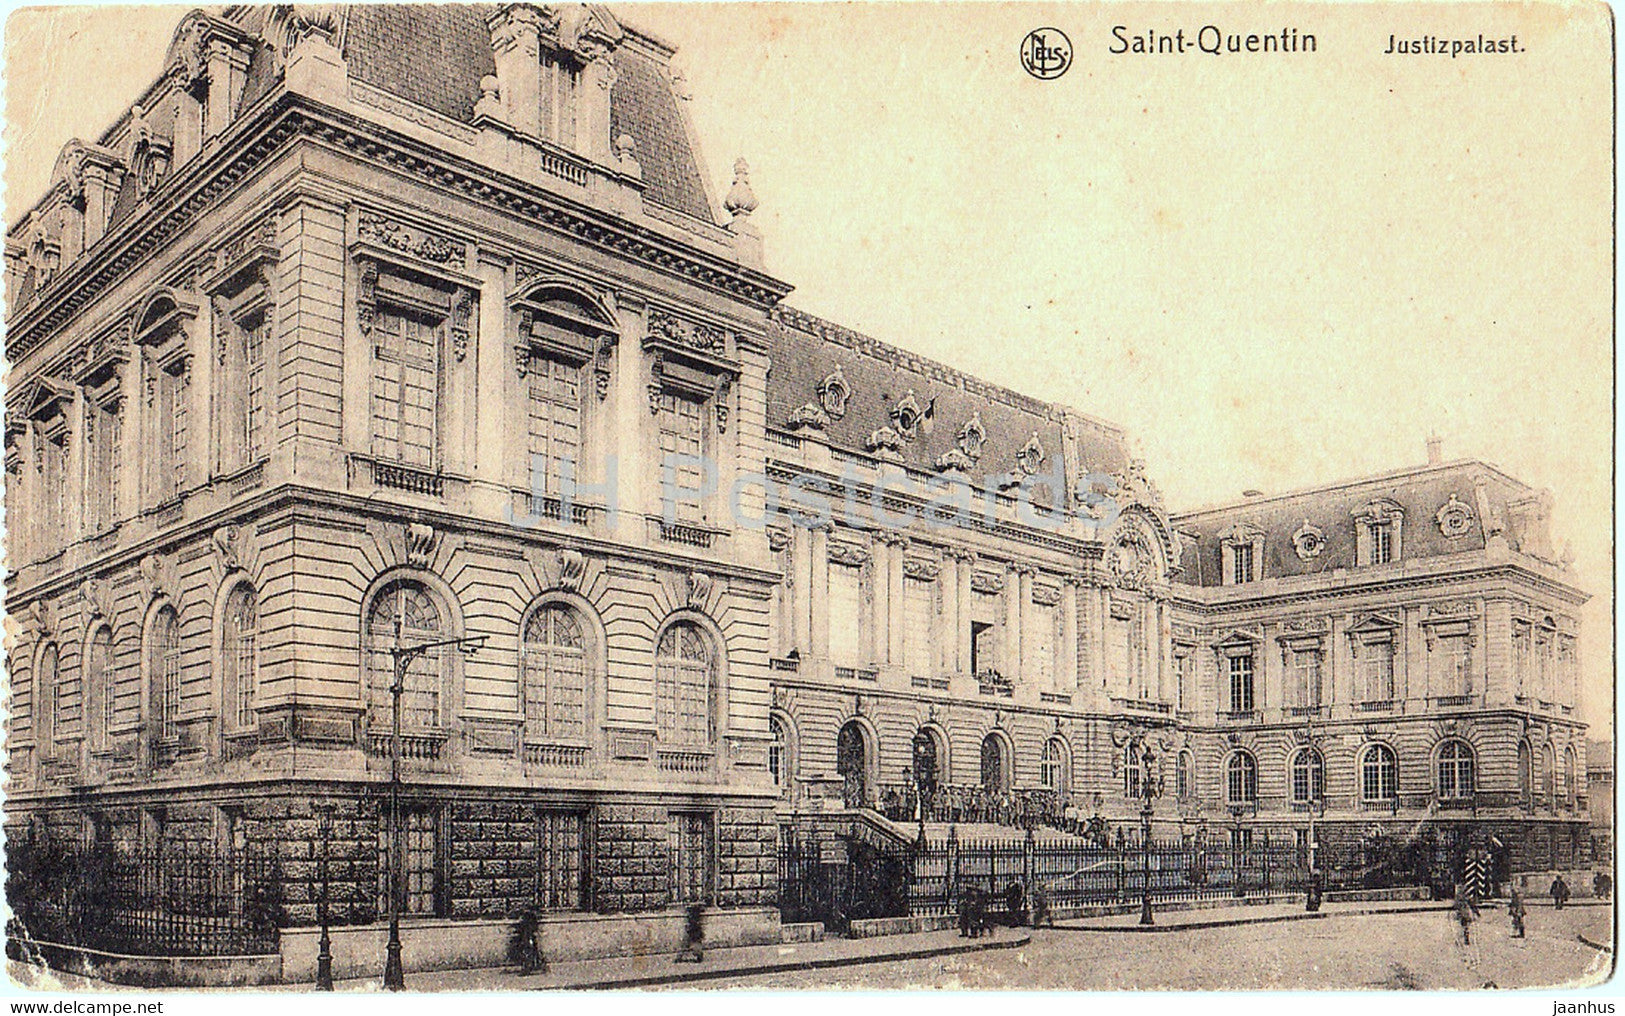 Saint Quentin - Justizpalast - Feldpost - old postcard - 1916 - France - used - JH Postcards